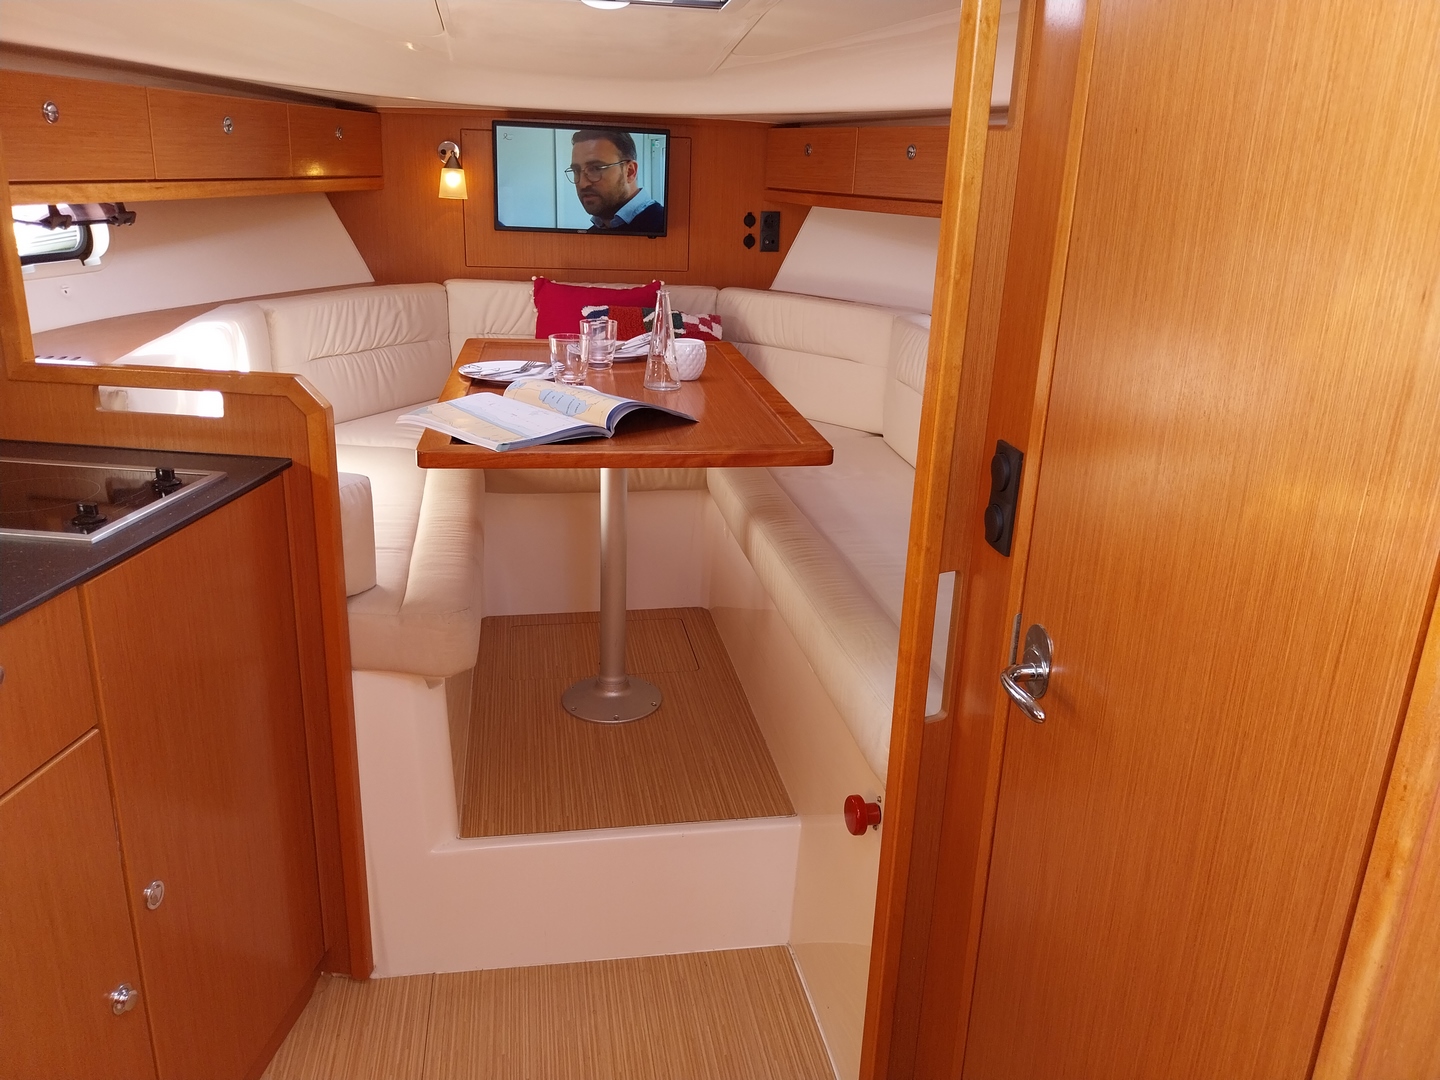 Interior bavaria 28 Sport for sale excellent condition table cushion and tv